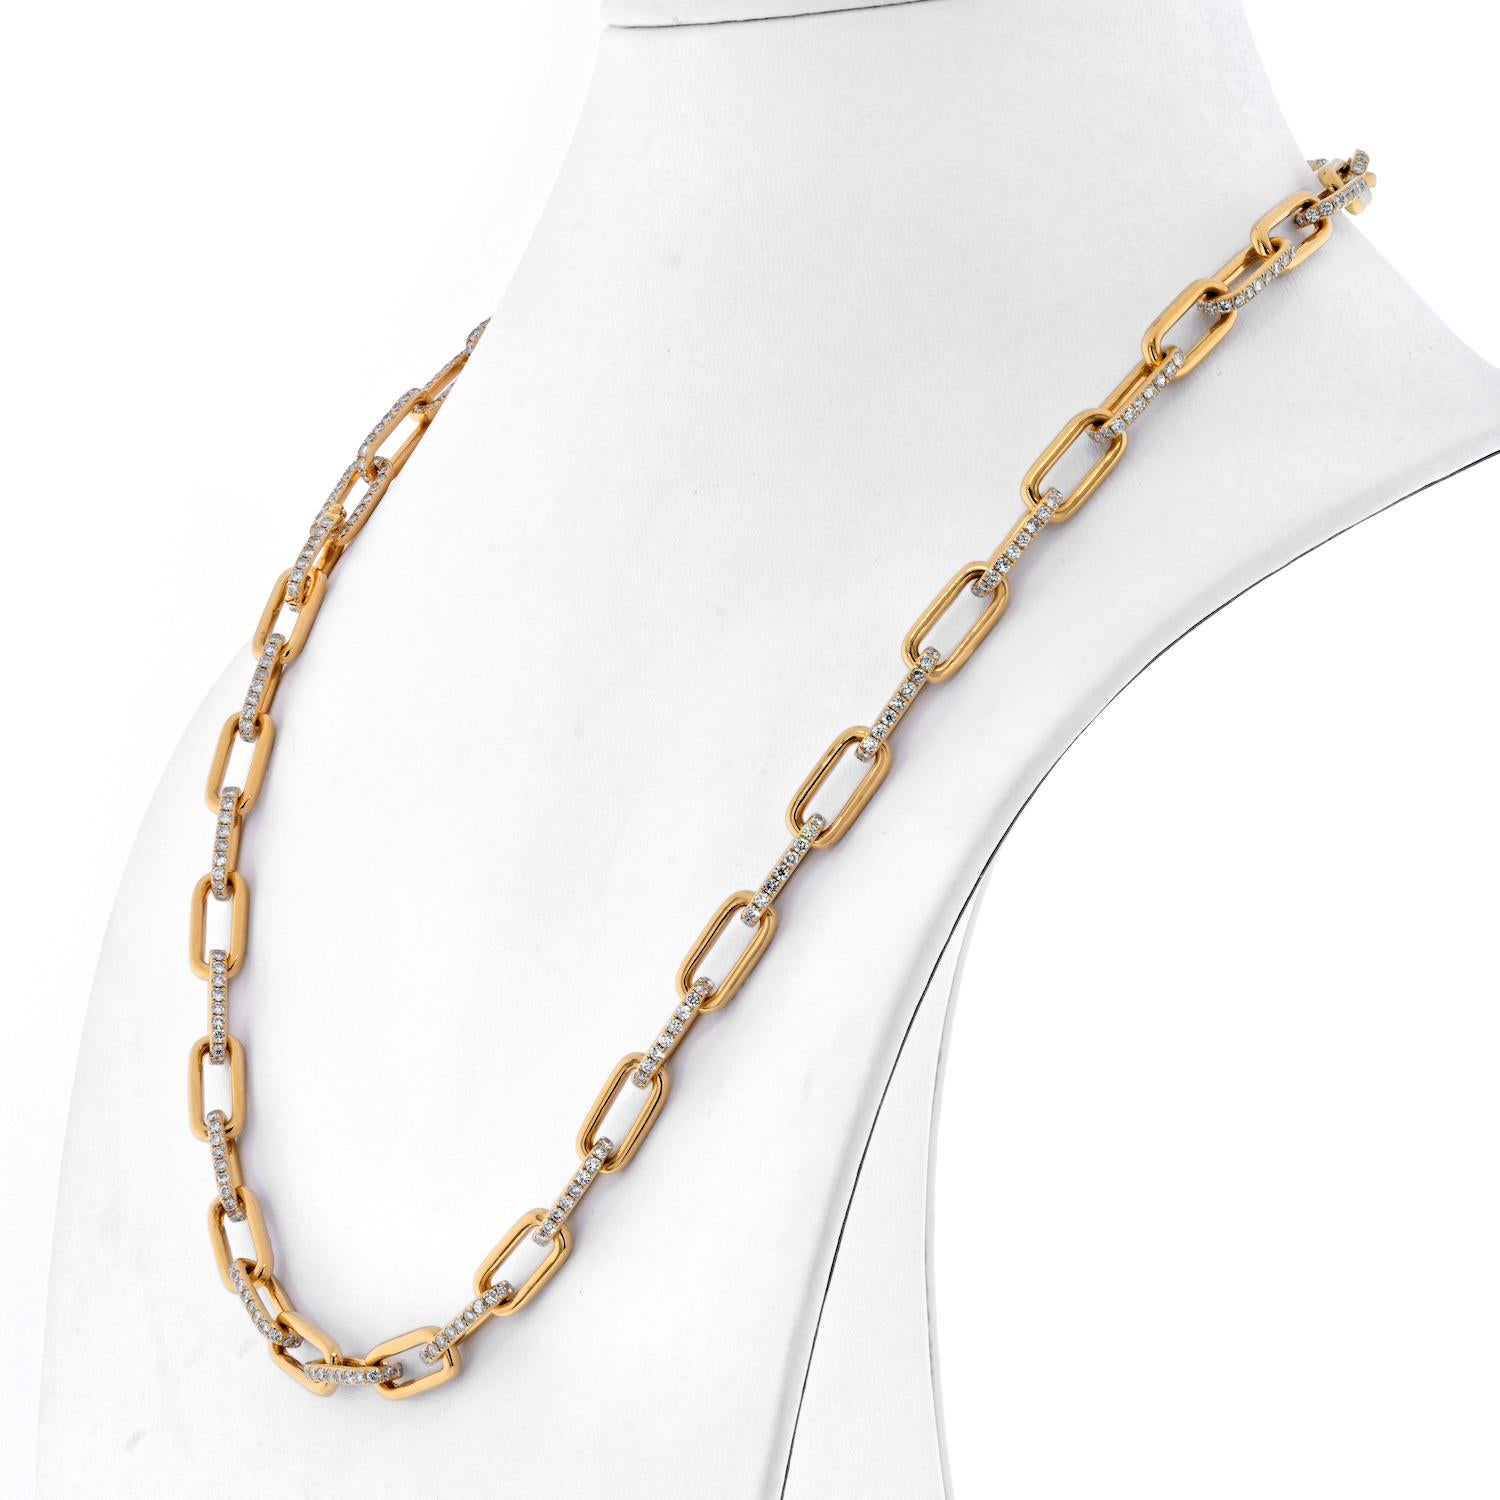 No your average paper clip diamond link chain necklace. Made in solid 18K Yellow Gold this chain diamond necklace is set with round cut diamonds on each link. Each station is solid and is about 2mm thick. 22 inches long this diamond chain offers a